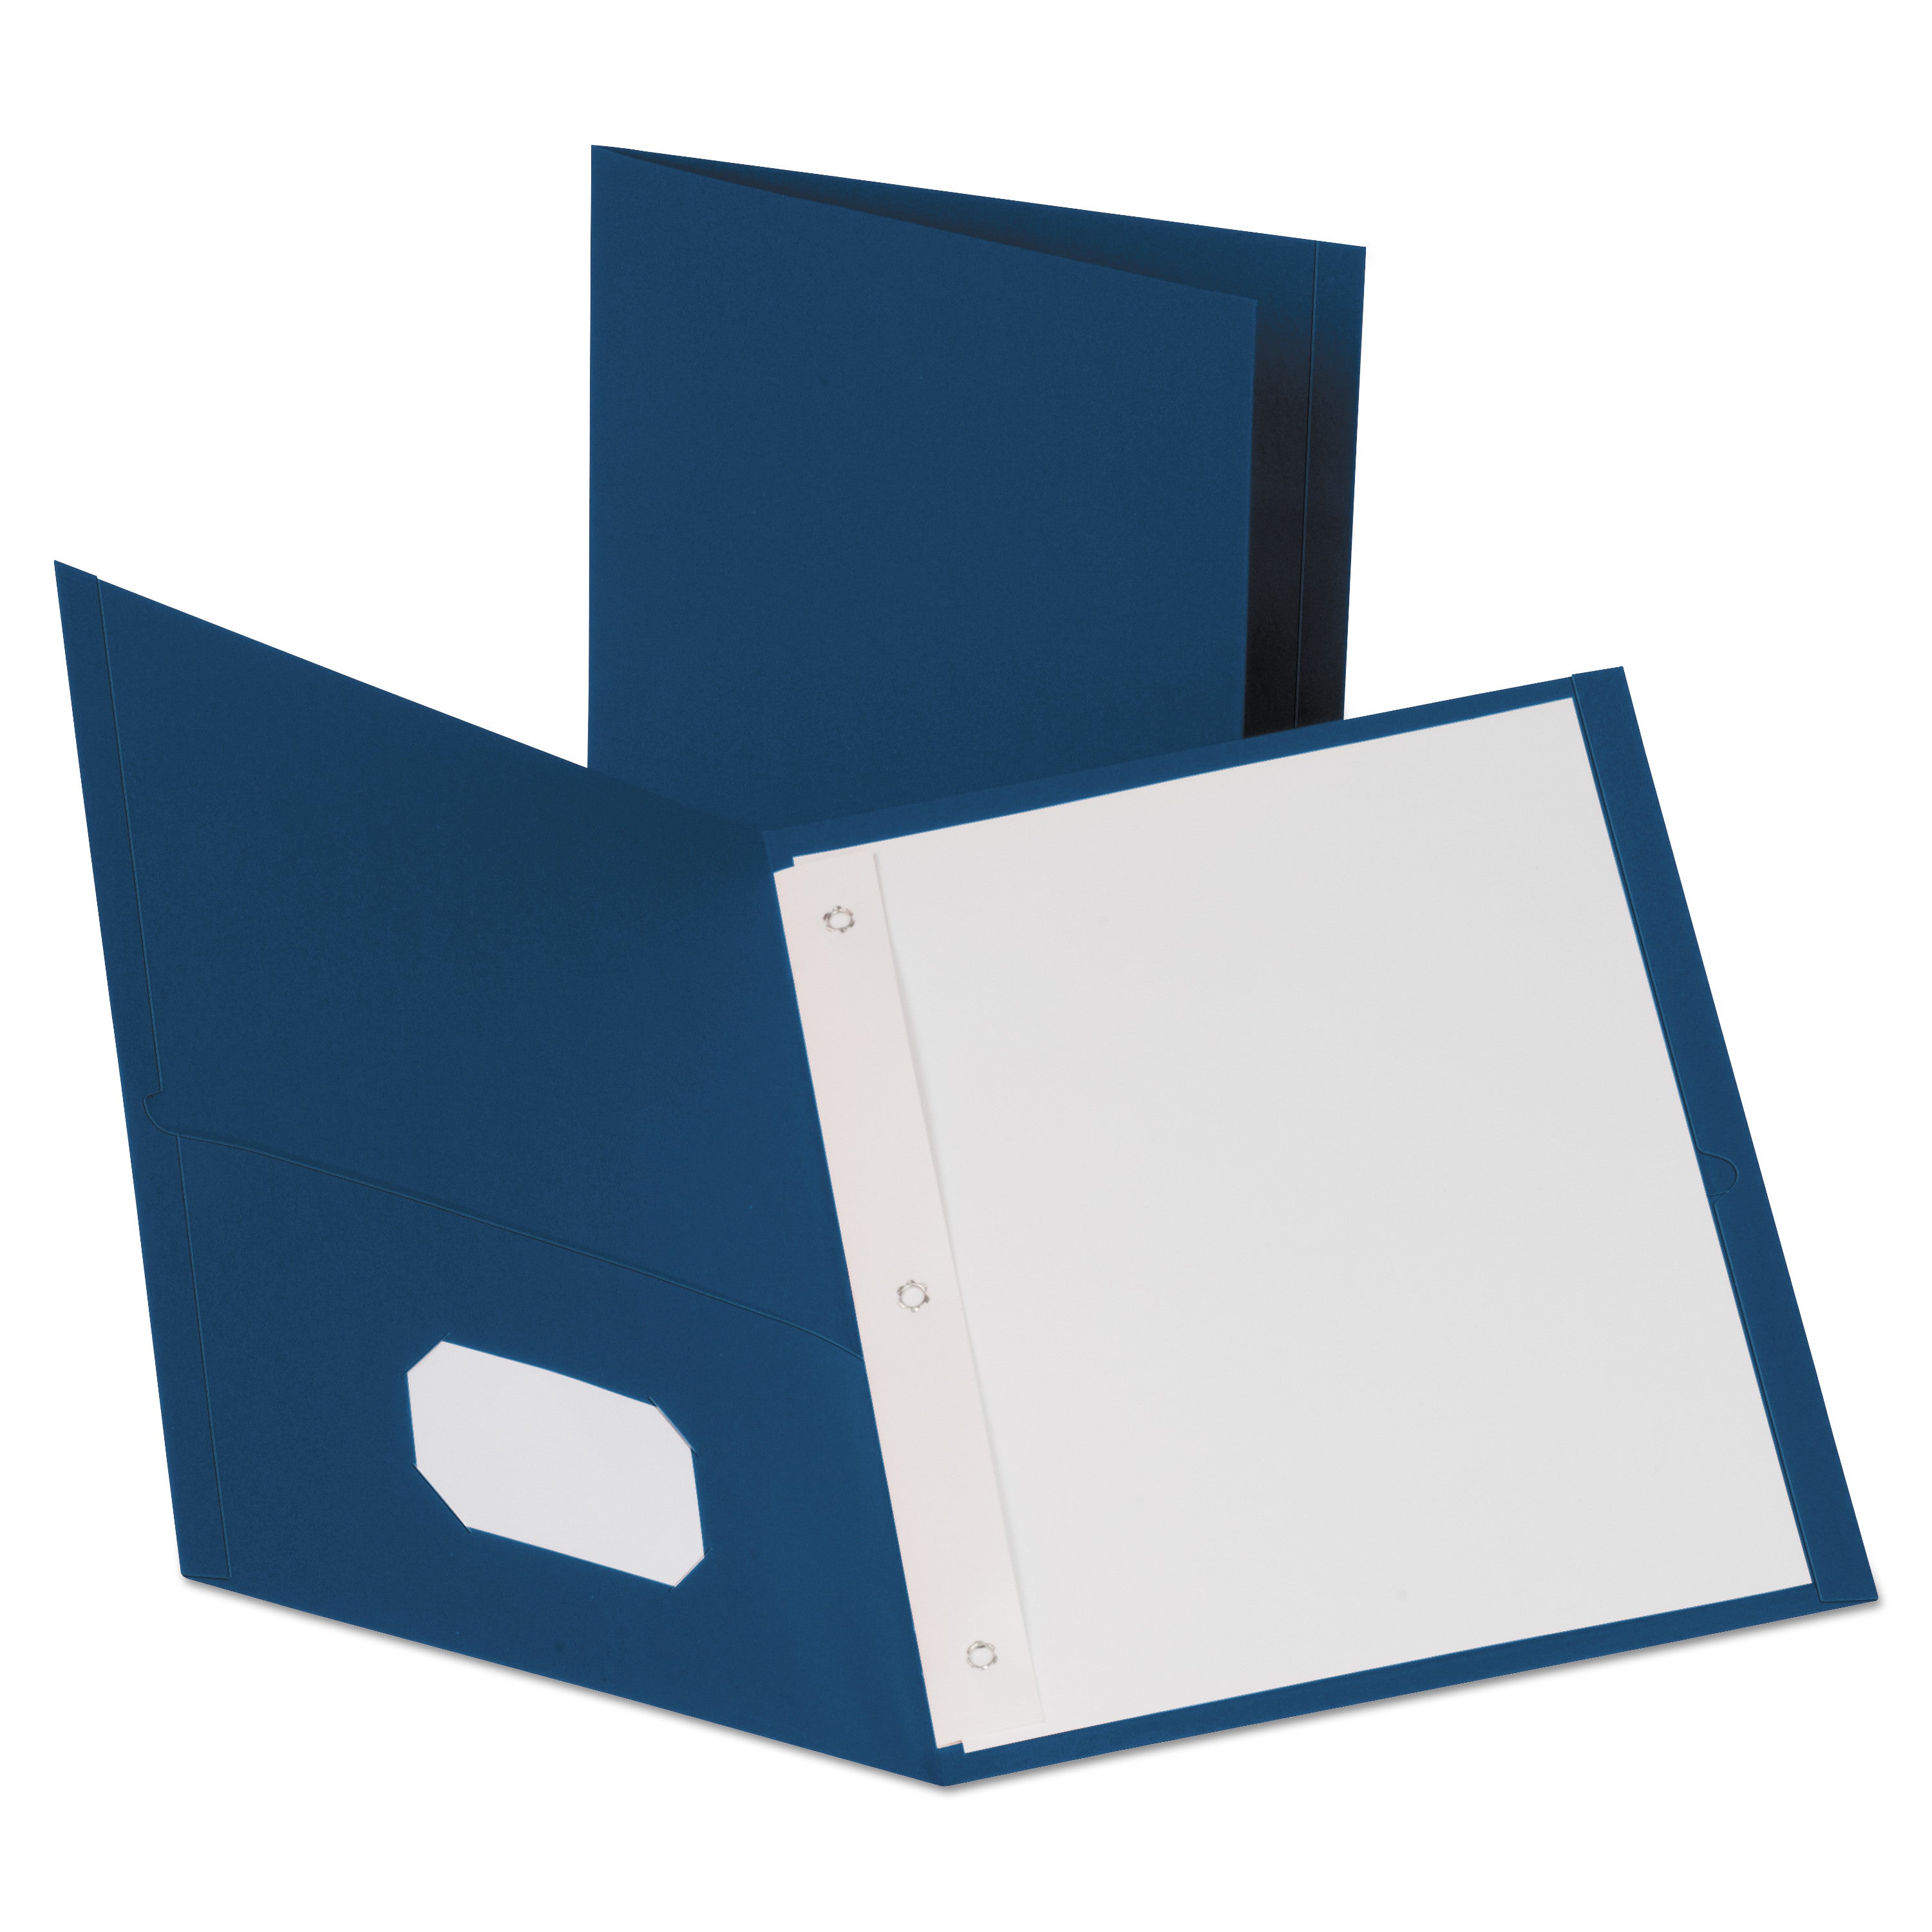 leatherette-two-pocket-portfolio-with-fasteners-85-x-11-blue-blue-10-pack_oxf57772 - 1